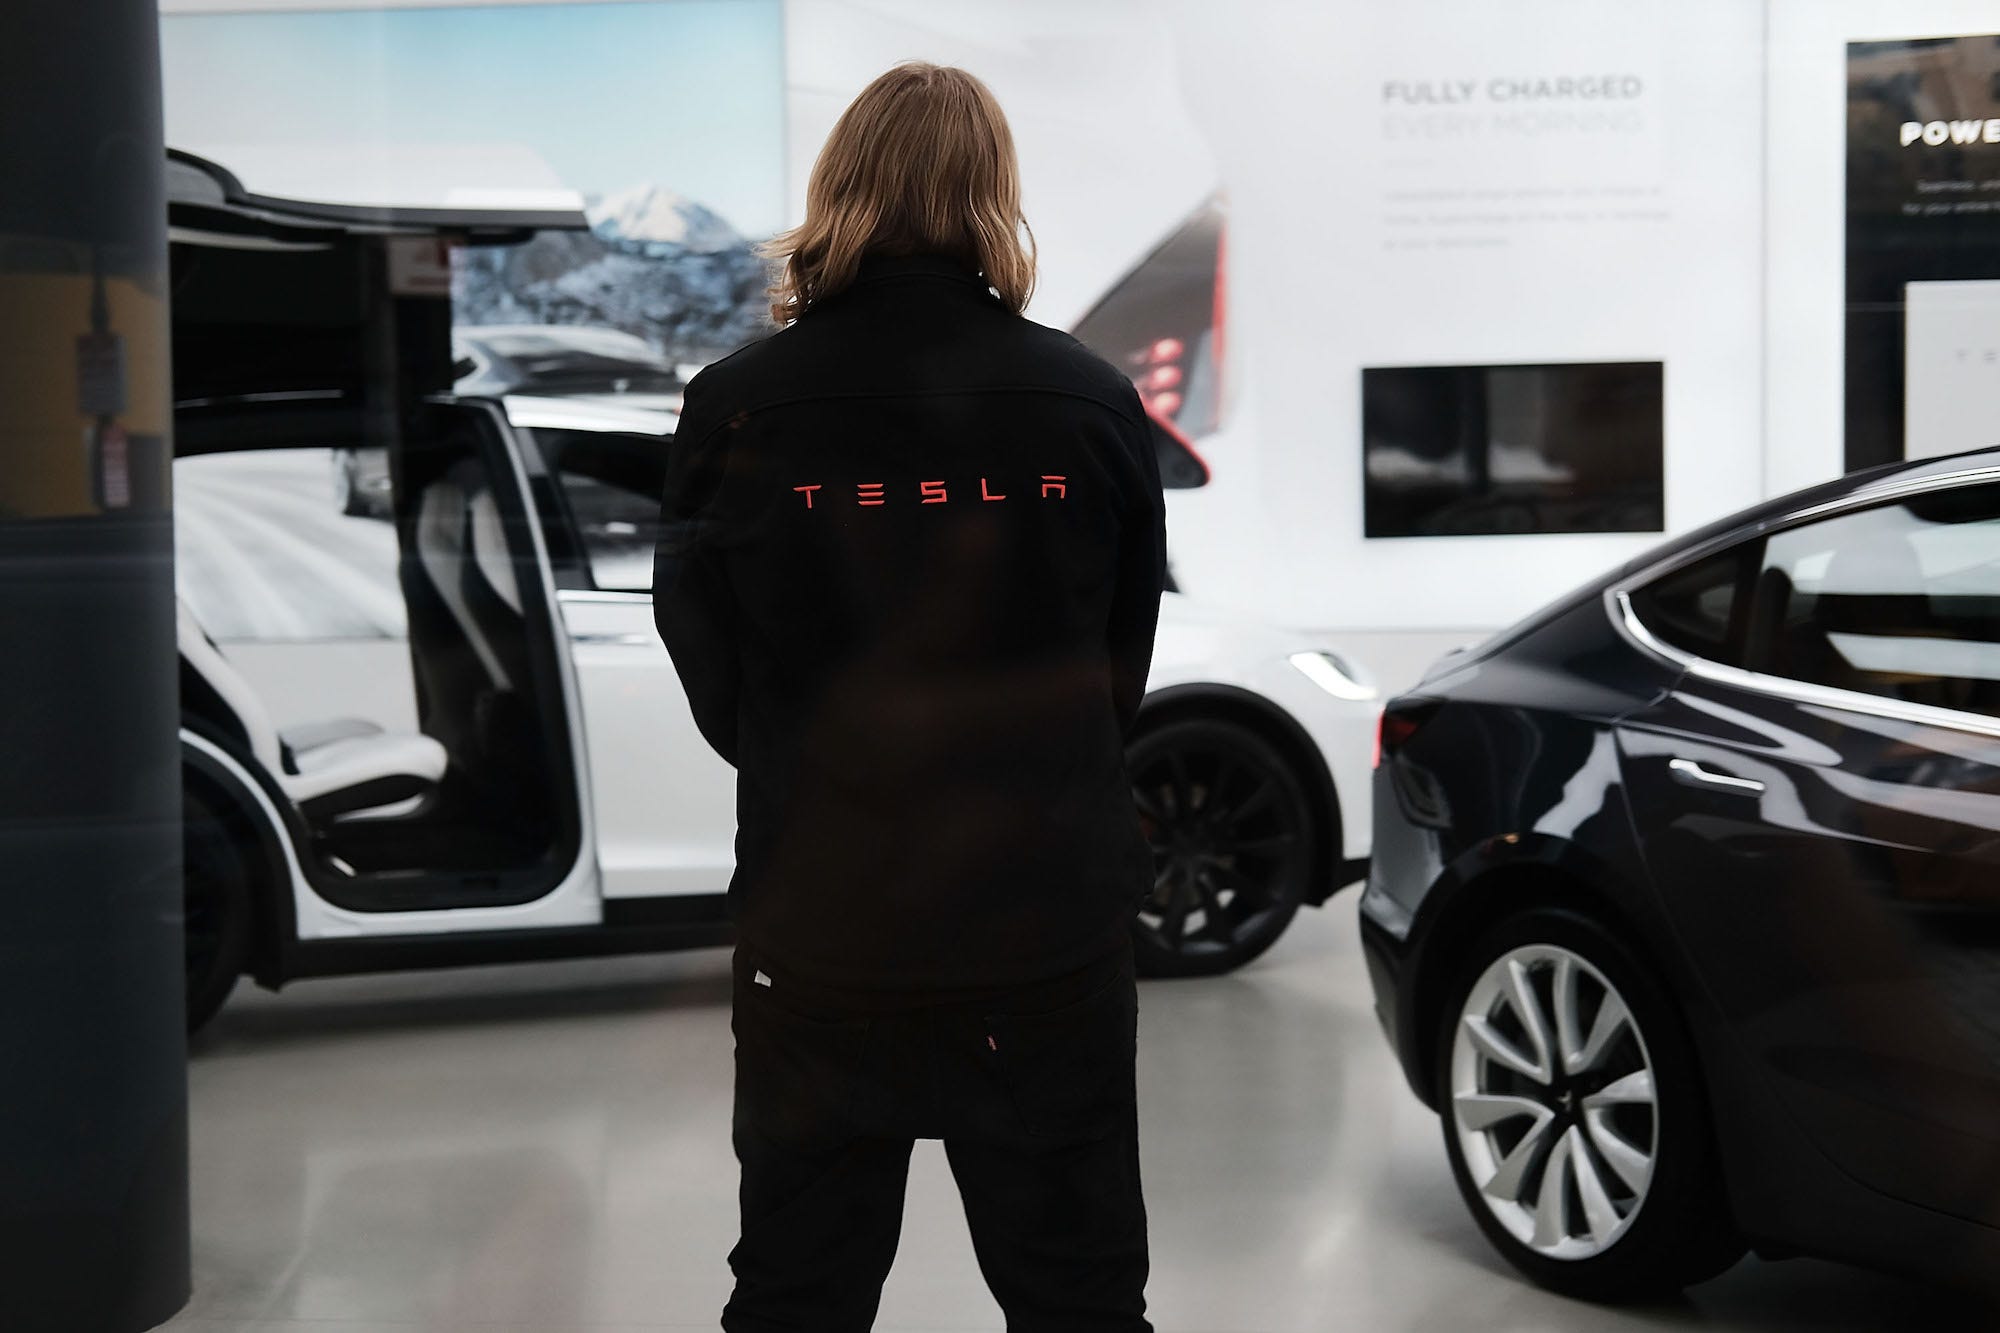 Tesla Vice President Valerie Workman said employees coming to work with COVID-19 symptoms were "putting everyone's lives at risk."